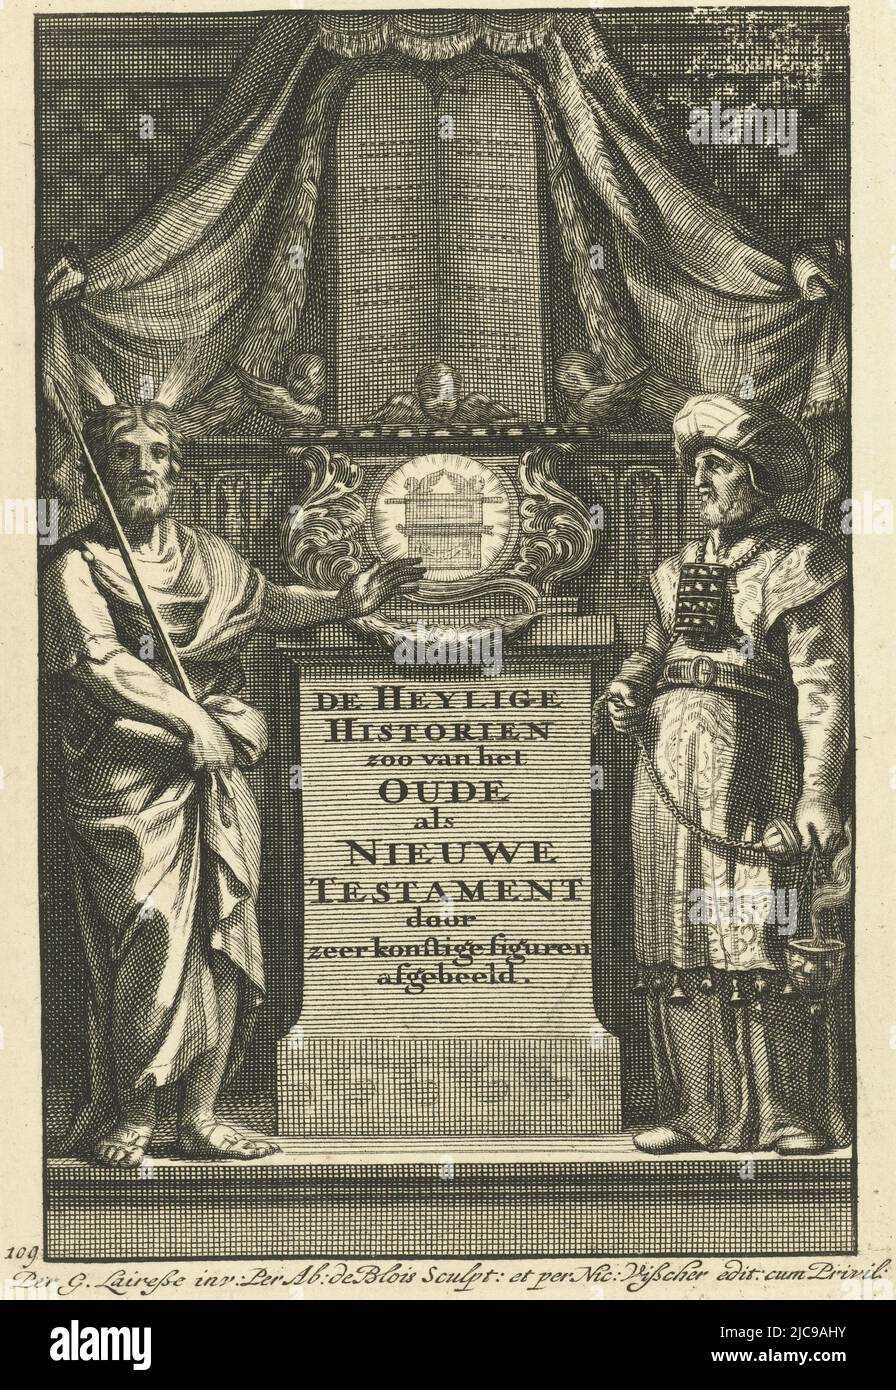 Allegory of the Old and New Testaments with glorification of the Tablets of the Law and the Ark of the Covenant on a pedestal. Moses and Aaron as high priest stand on either side. Allegory of the Old and New Testament with Moses and Aaron Title page for: De Heylige historien zoo van het Oude als Nieuwe Testament, Amsterdam De Heylige historien zoo van het Oude als Nieuwe Testament , print maker: Abraham de Blois, (mentioned on object), Gerard de Lairesse, (mentioned on object), publisher: Nicolaes Visscher (I), (mentioned on object), Amsterdam, 1651 - 1679, paper, engraving, h 159 mm × w 108 Stock Photo